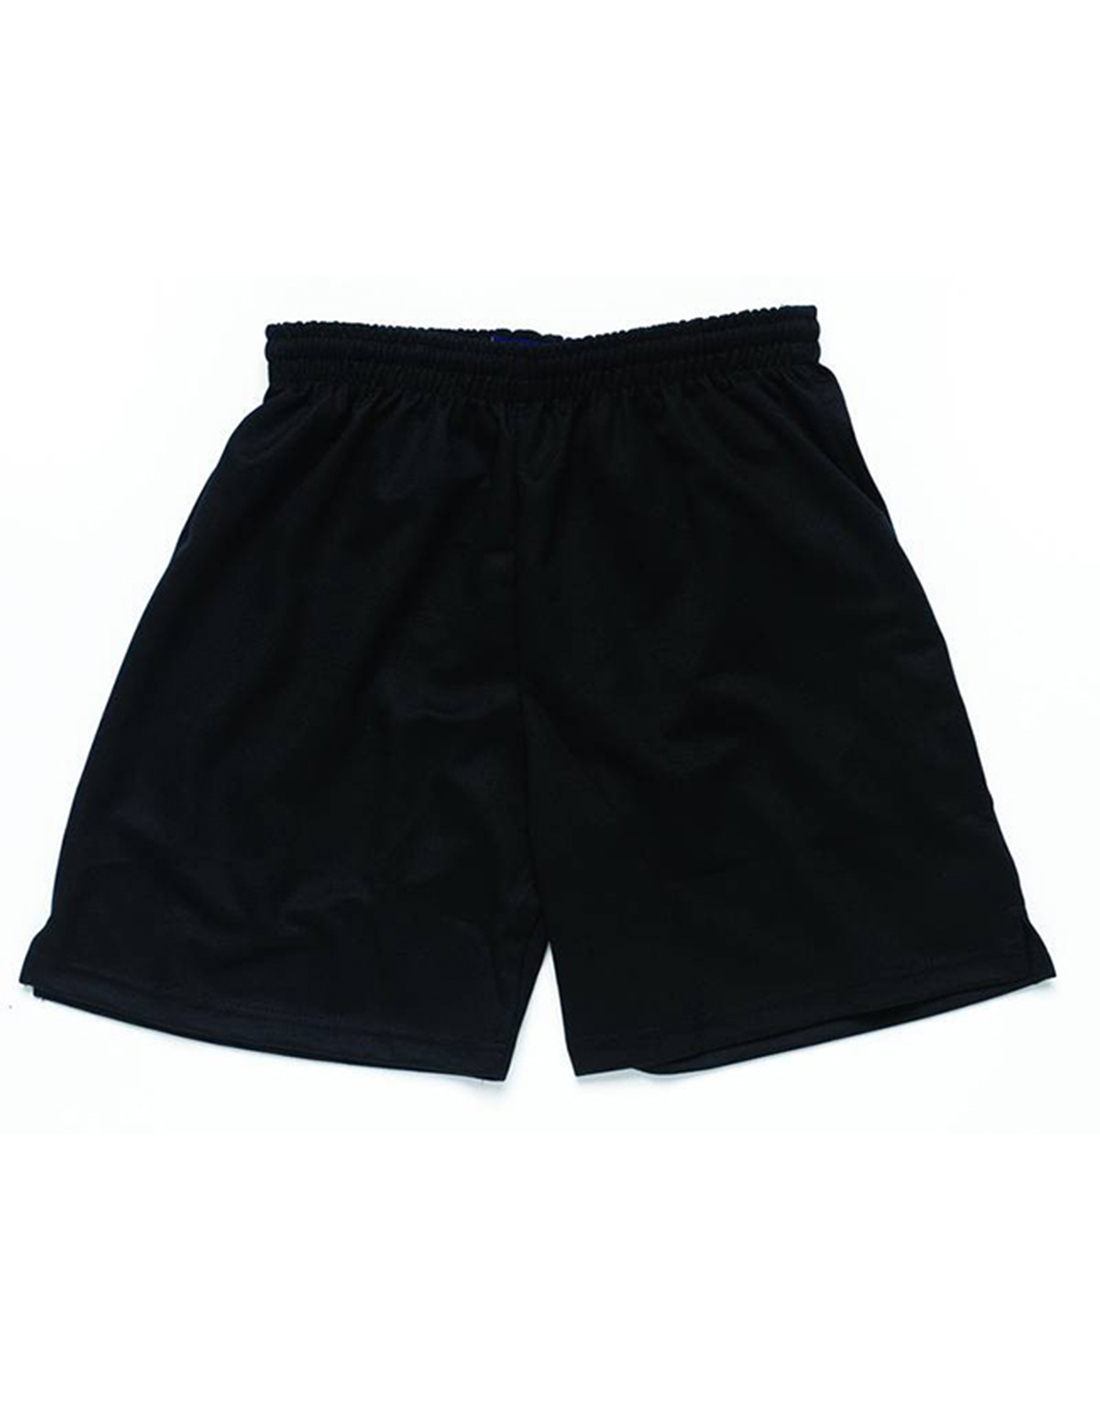 Sports Shorts - Sabre Sports Products